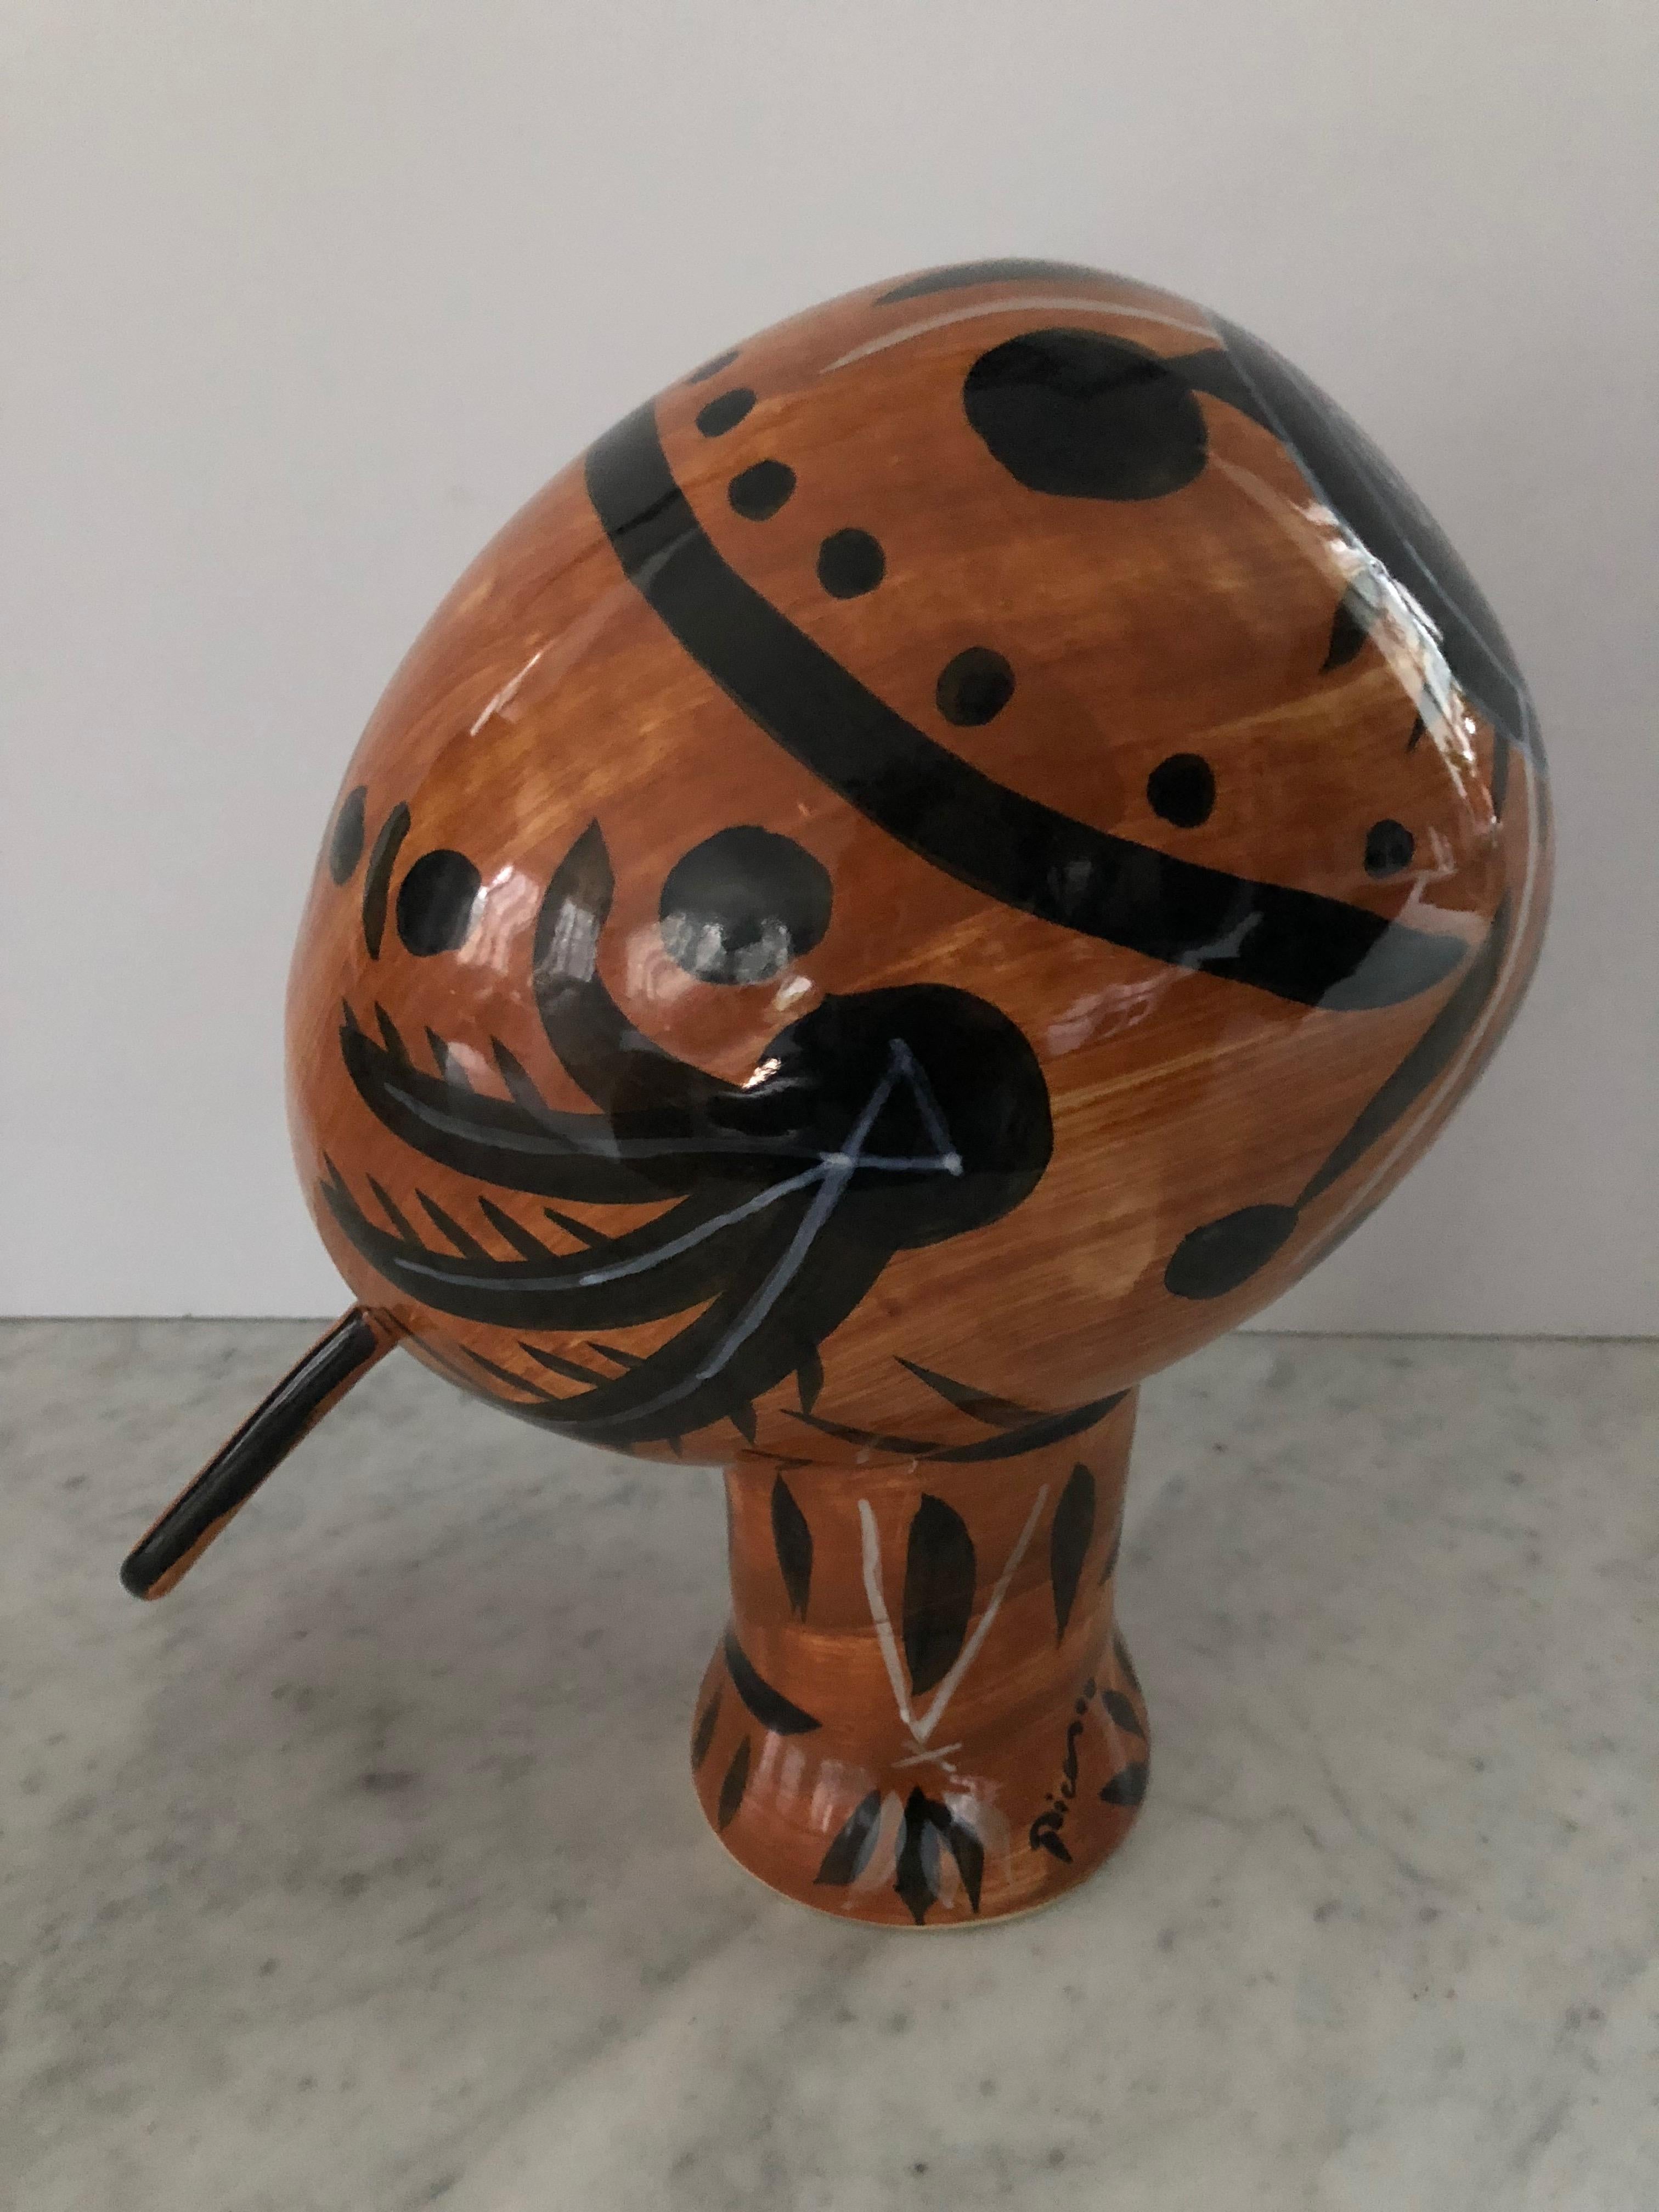 Padilla Pottery Limited Edition Sculpture Inspired by Picasso 1